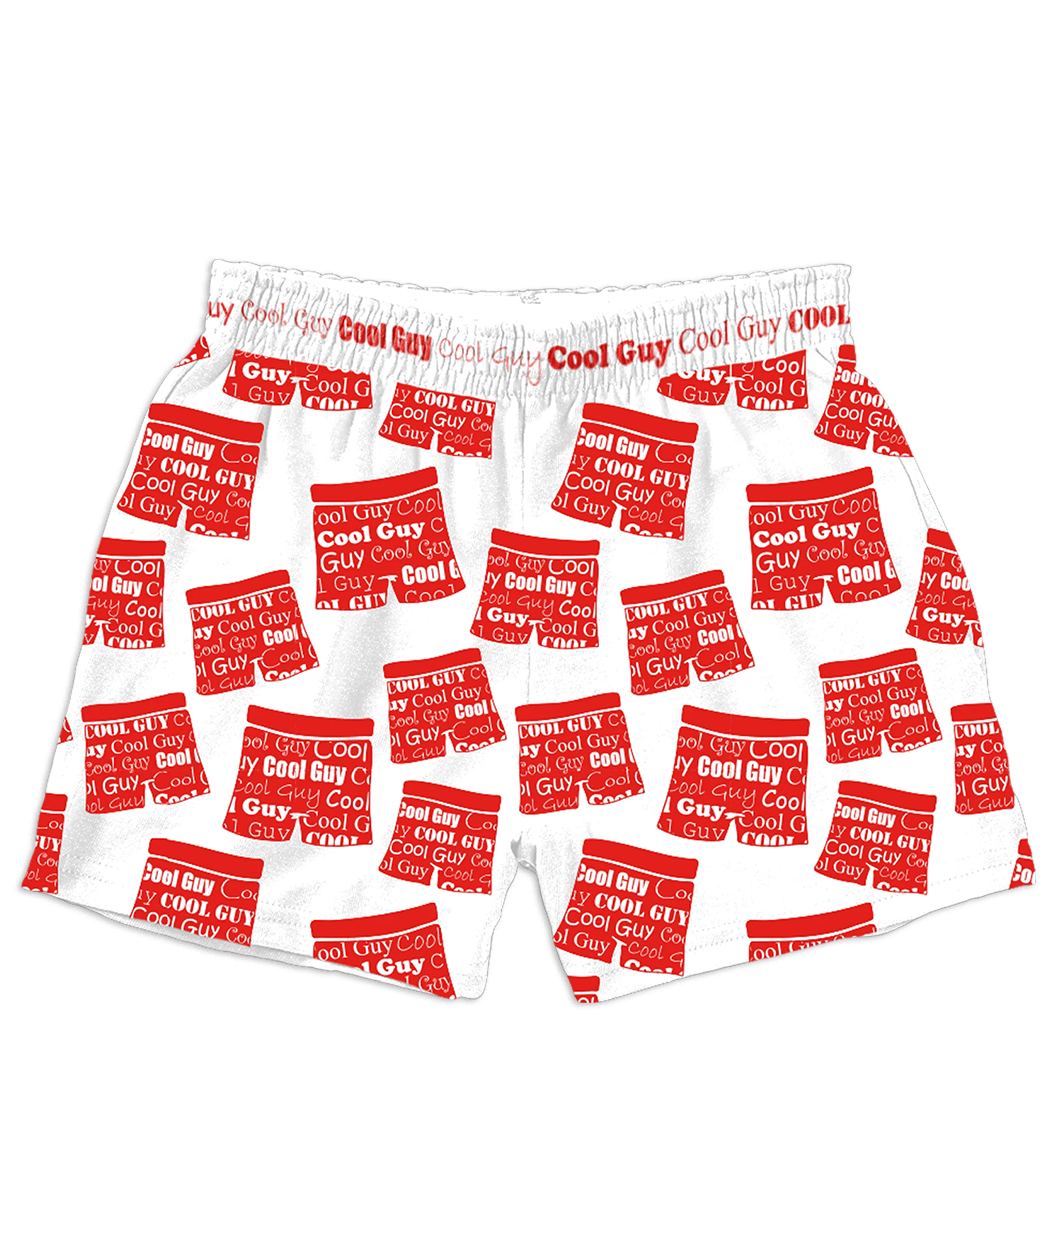 White boxer shorts with a pattern of red boxer shorts that say "Cool Guy" on them in different alternating fonts. The words "Cool Guy" are repeated in red on the waist band in the same different alternating fonts.